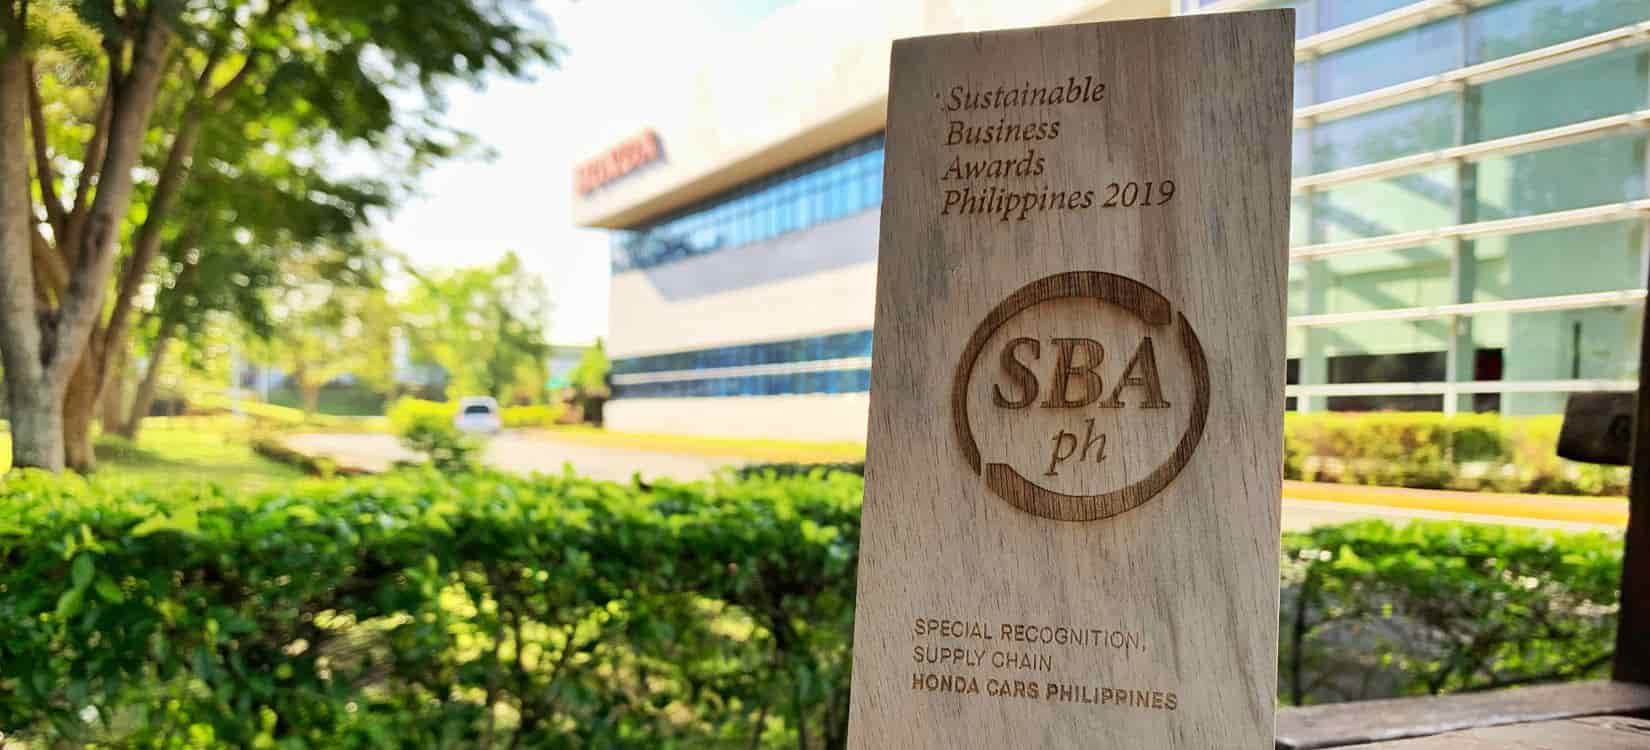 Honda recognized in the Sustainable Business Awards 2019